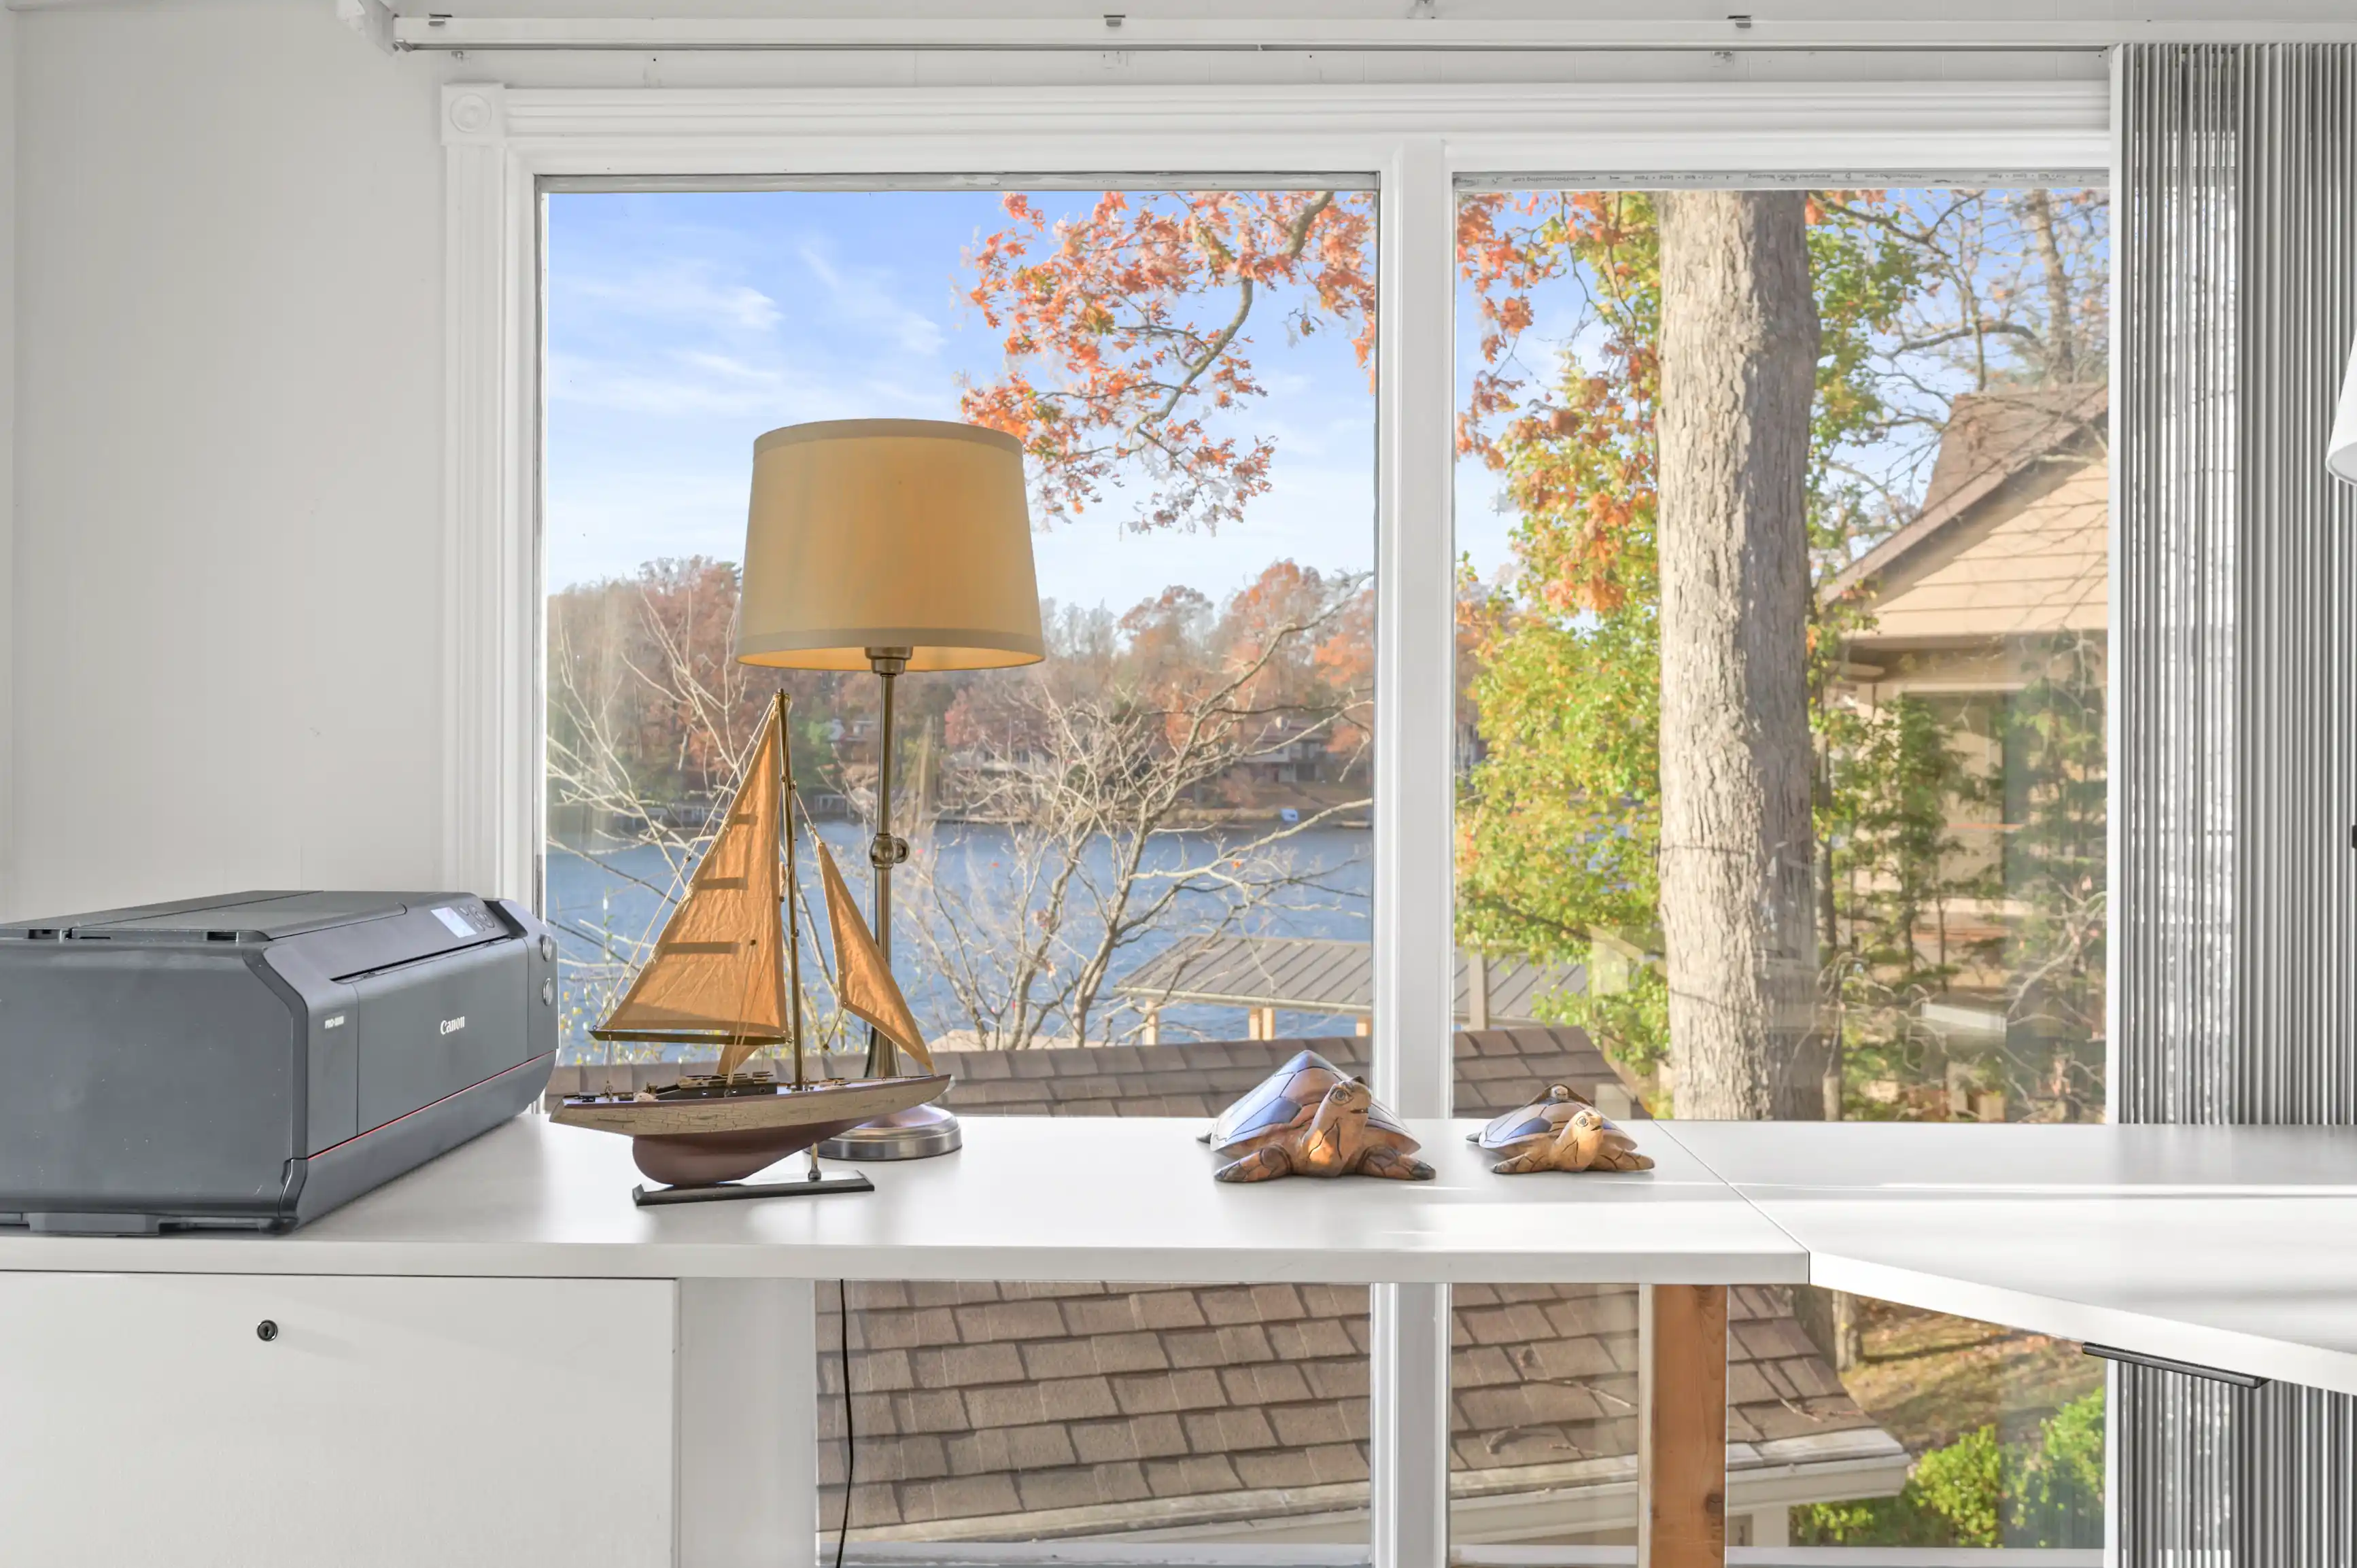 Bright home office with a white desk featuring a printer, decorative sailing ship, and sunglasses, with a lamp and a window overlooking a lake surrounded by autumn trees.